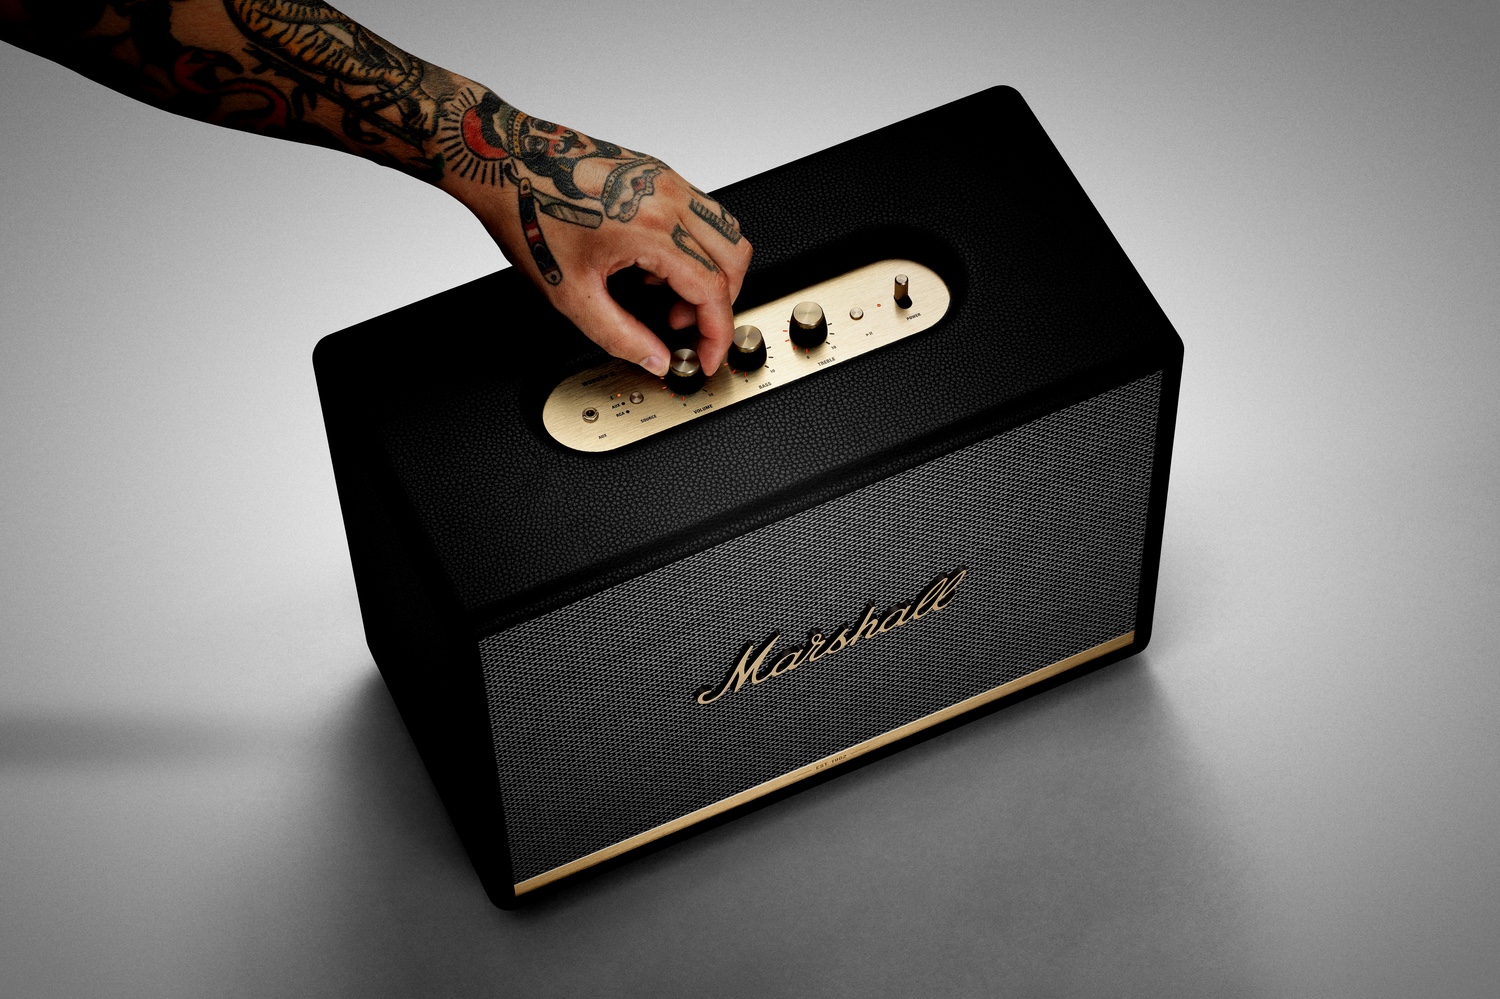 Updated Marshall Bluetooth Speakers Merge Improved Tech, Iconic